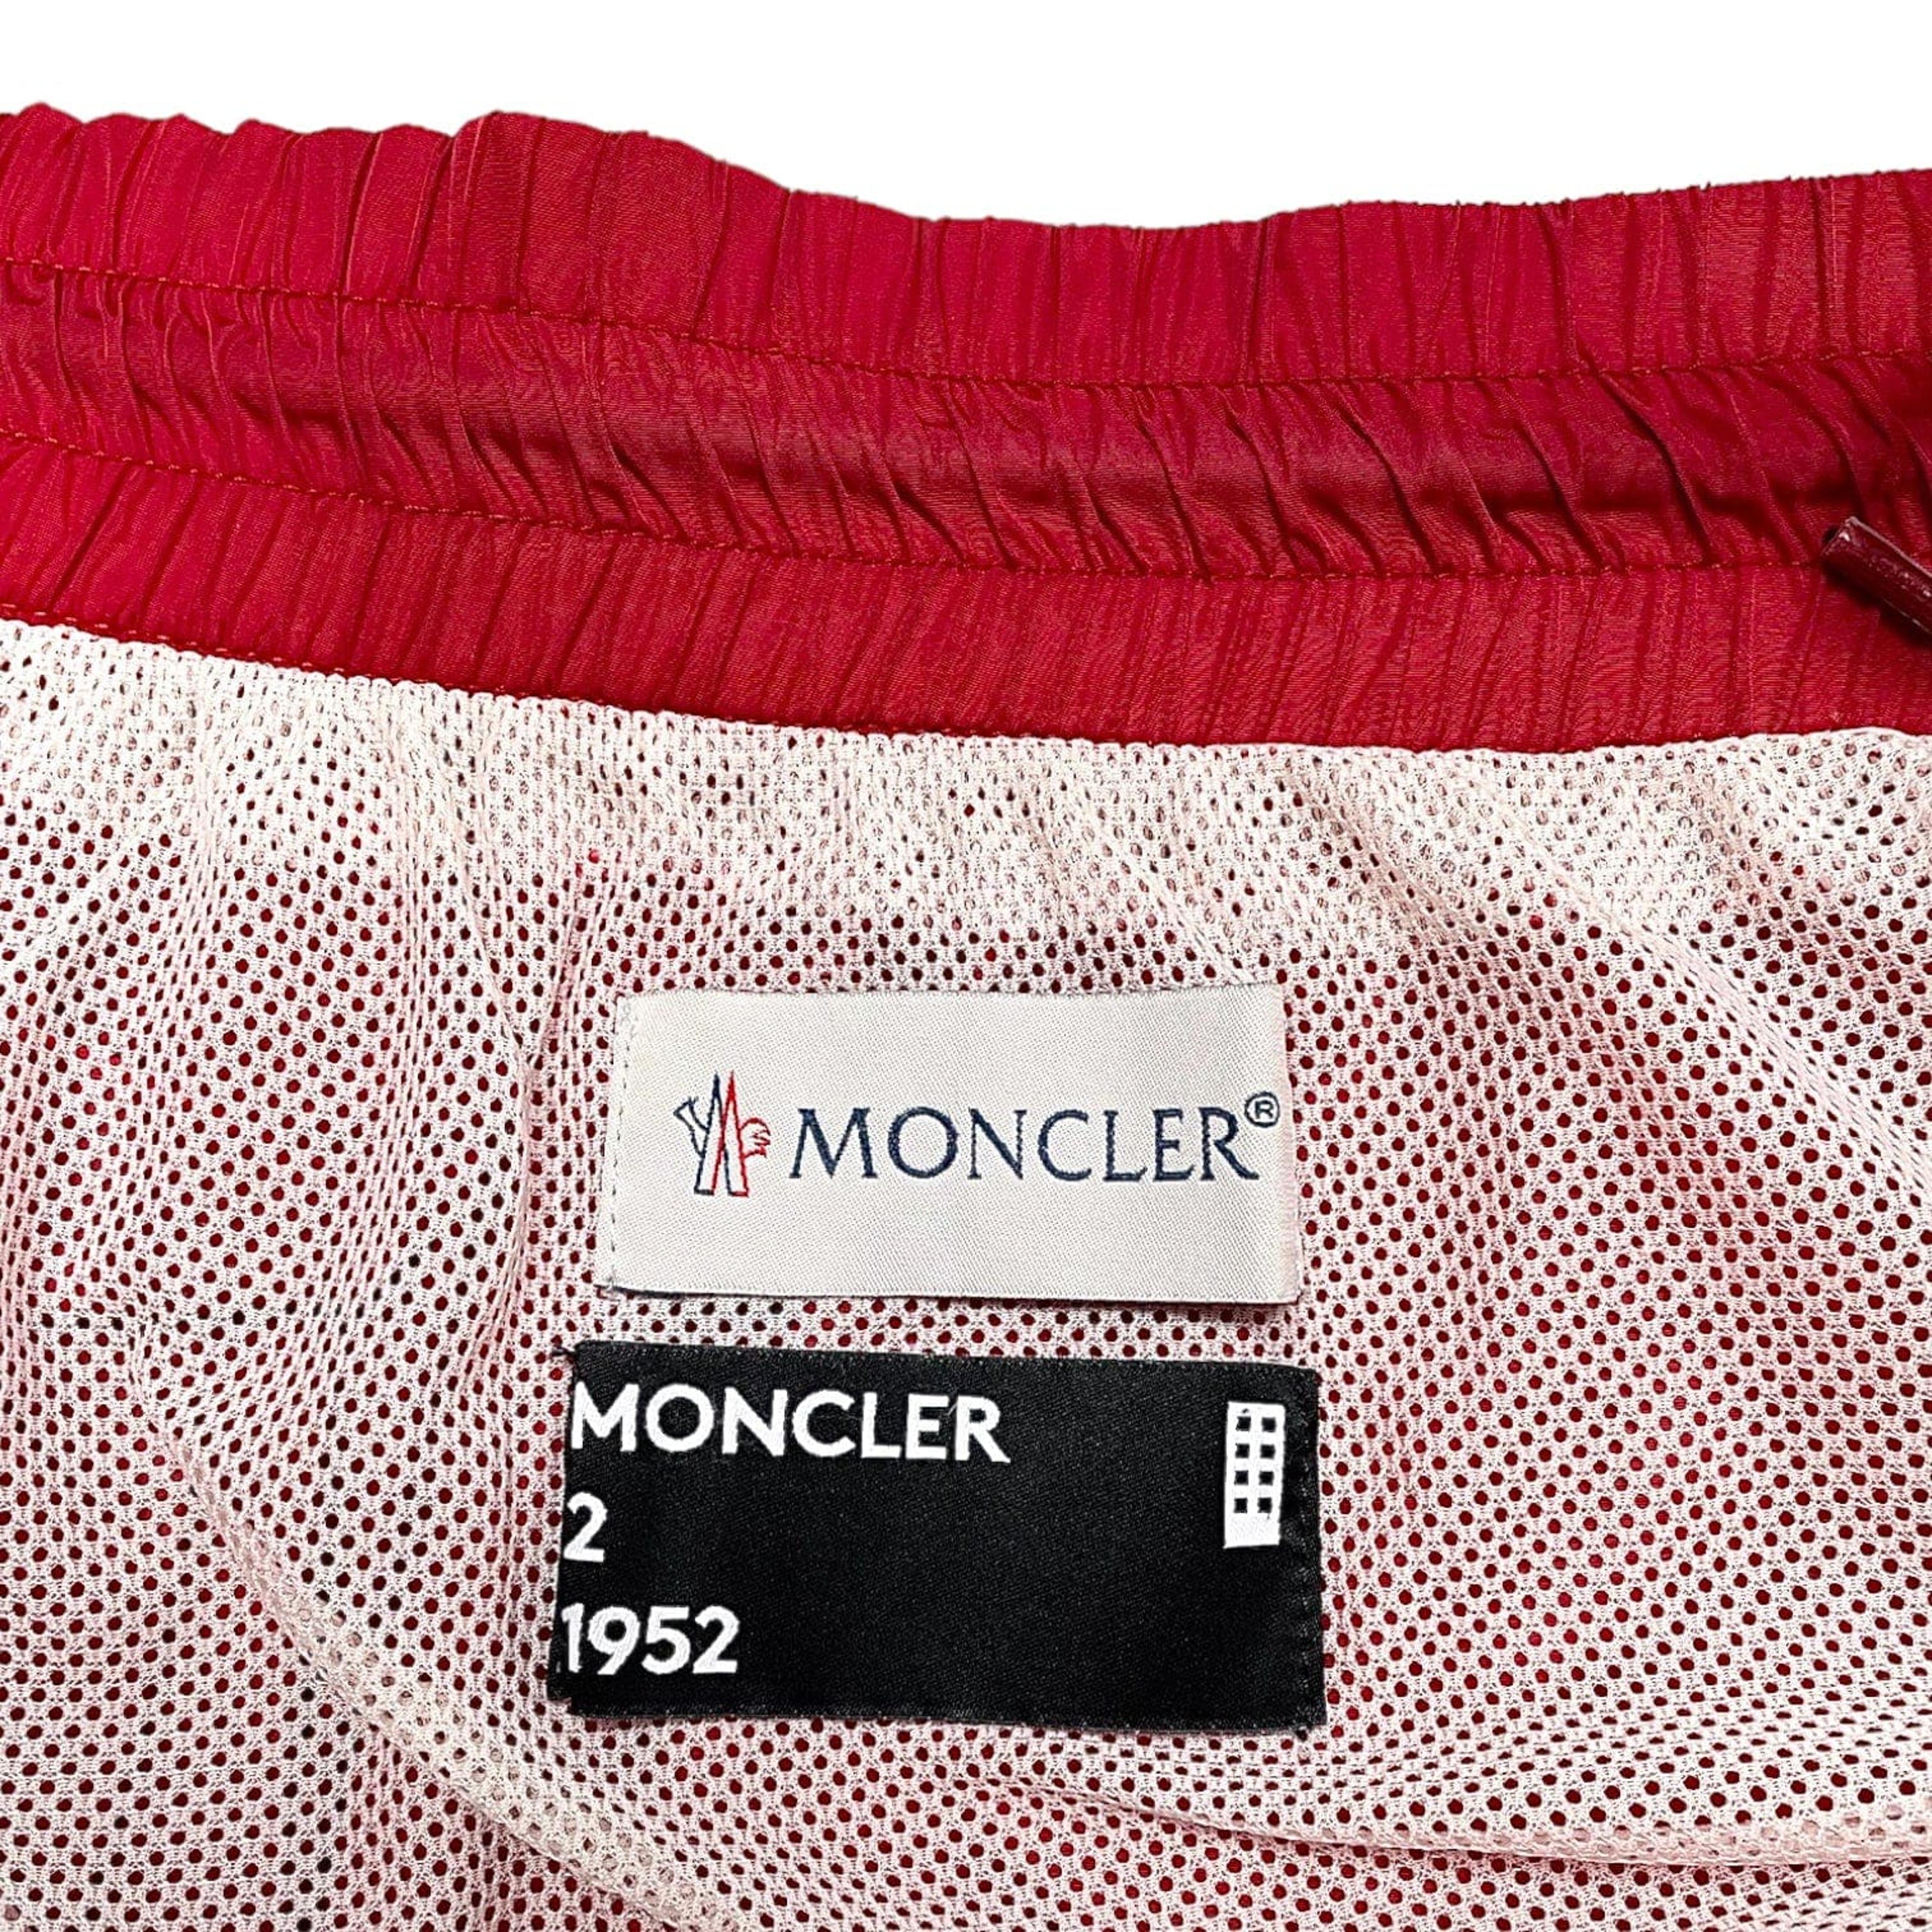 Alternate View 4 of Moncler Pantalone Track Pants Red Pre-Owned